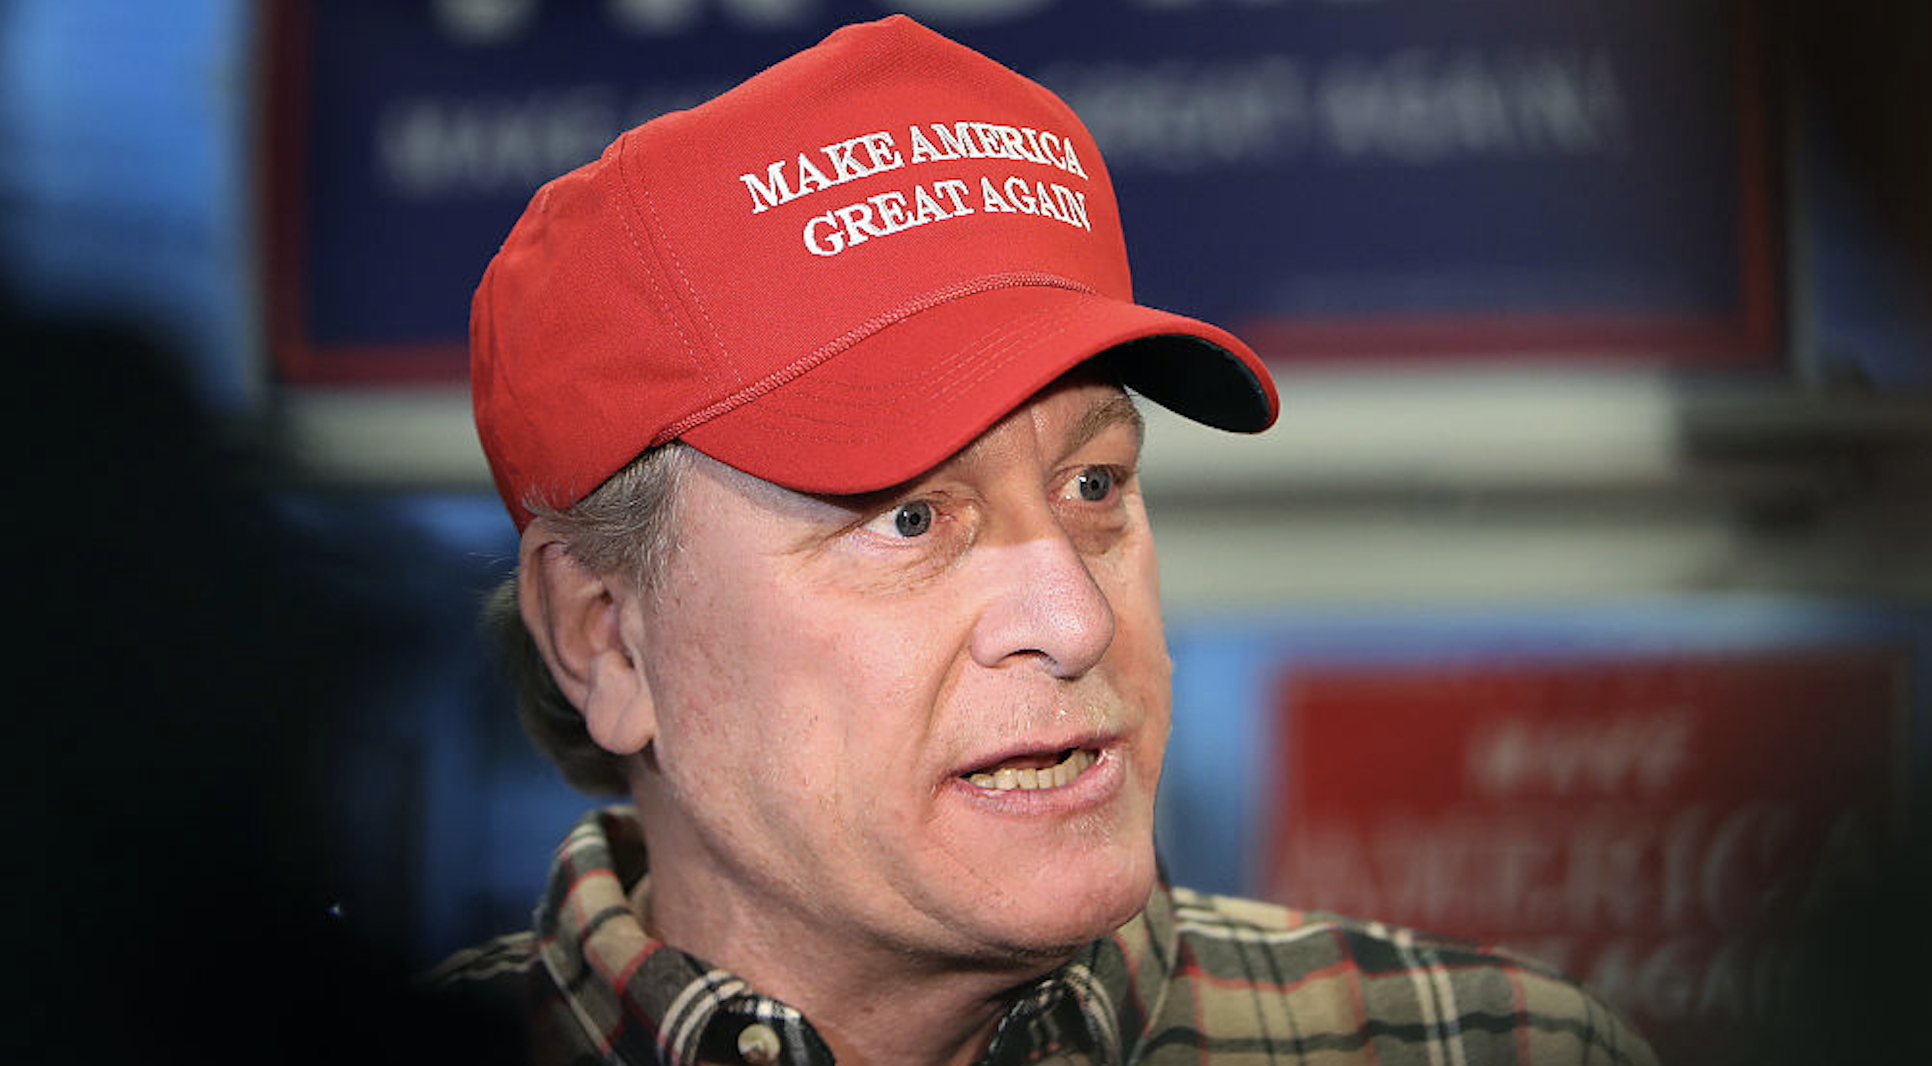 SALEM, NH - OCTOBER 18: Former Boston Red Sox pitcher Curt Schilling speaks to the gathered media as he makes an appearance at a Republican Party office in Salem, NH to stump for the presidential candidacy of Donald Trump on Oct. 18, 2016. (Photo by Jim Davis/The Boston Globe via Getty Images)